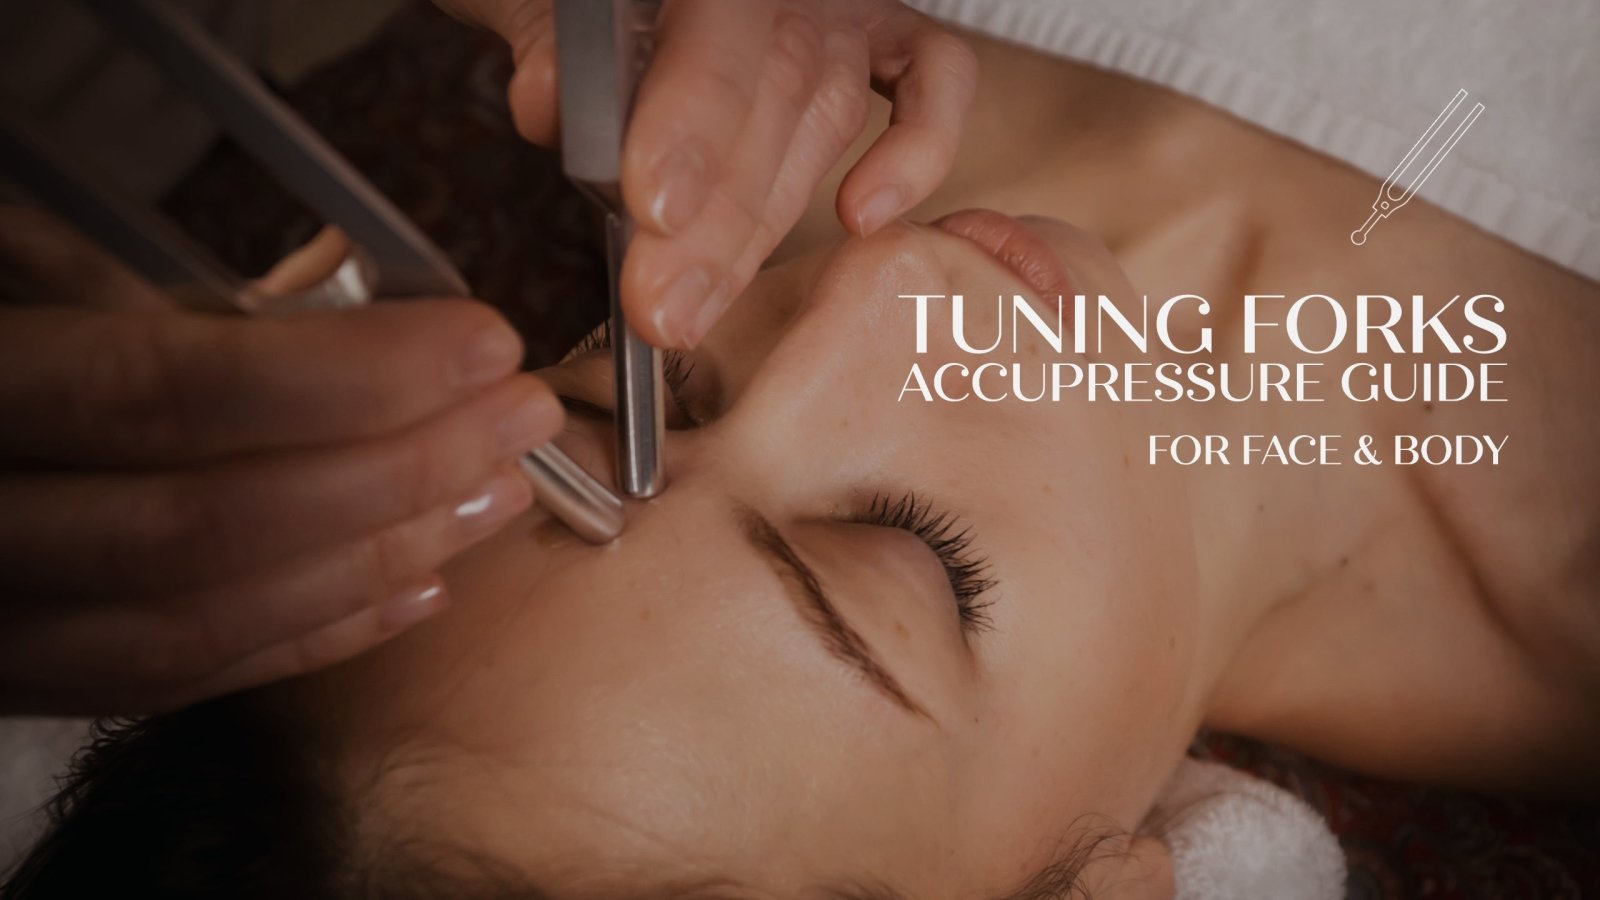 Tuning Forks Sonic Healing: The Ultimate Guide to Facial and Body Acupressure Points - Sound Healing LAB